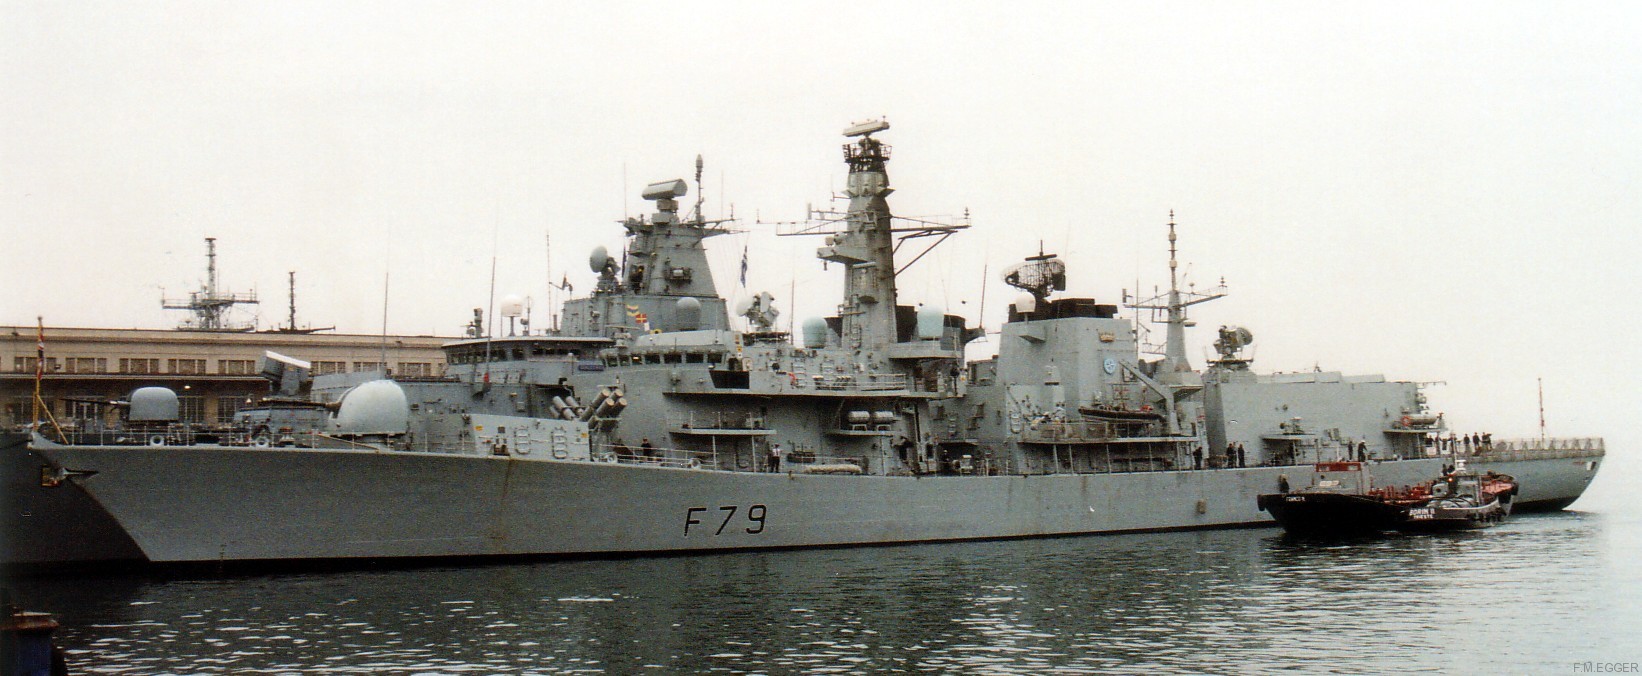 f-79 hms portland type 23 duke class guided missile frigate ffg royal navy 19 stanavformed nato trieste italy